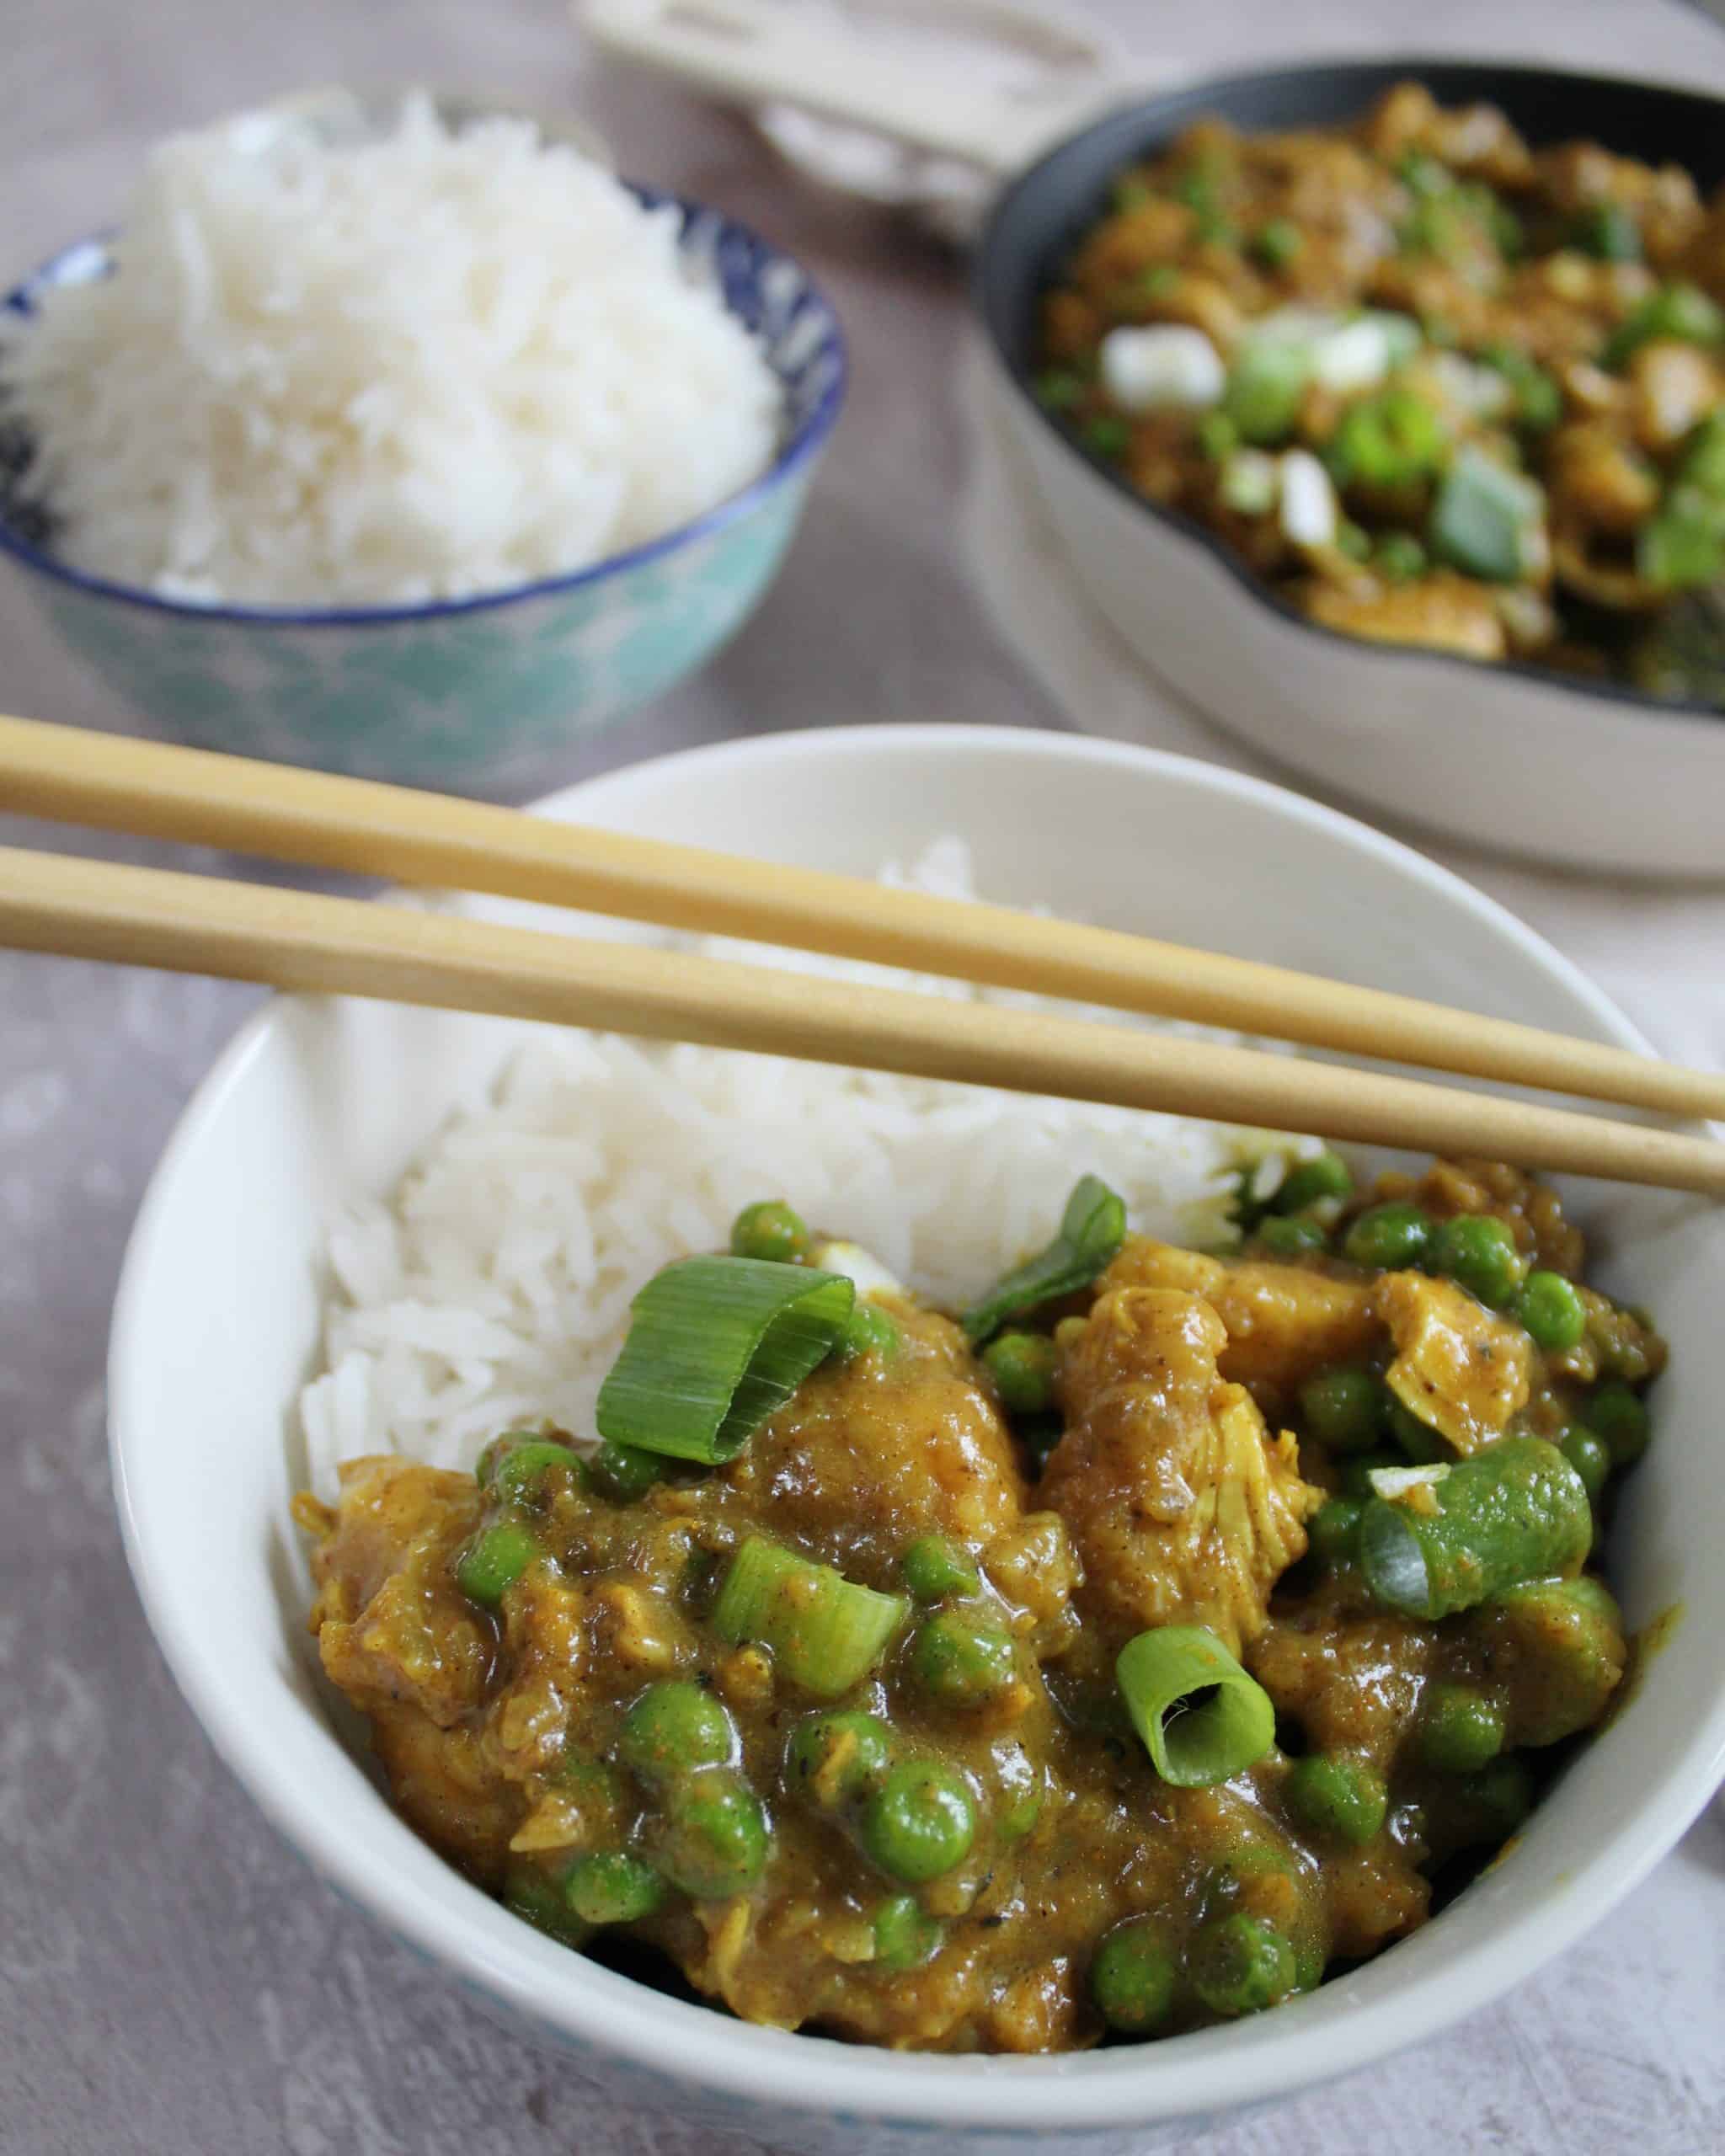 EASY Gluten Free Chinese Curry Recipe - The Gluten Free Blogger